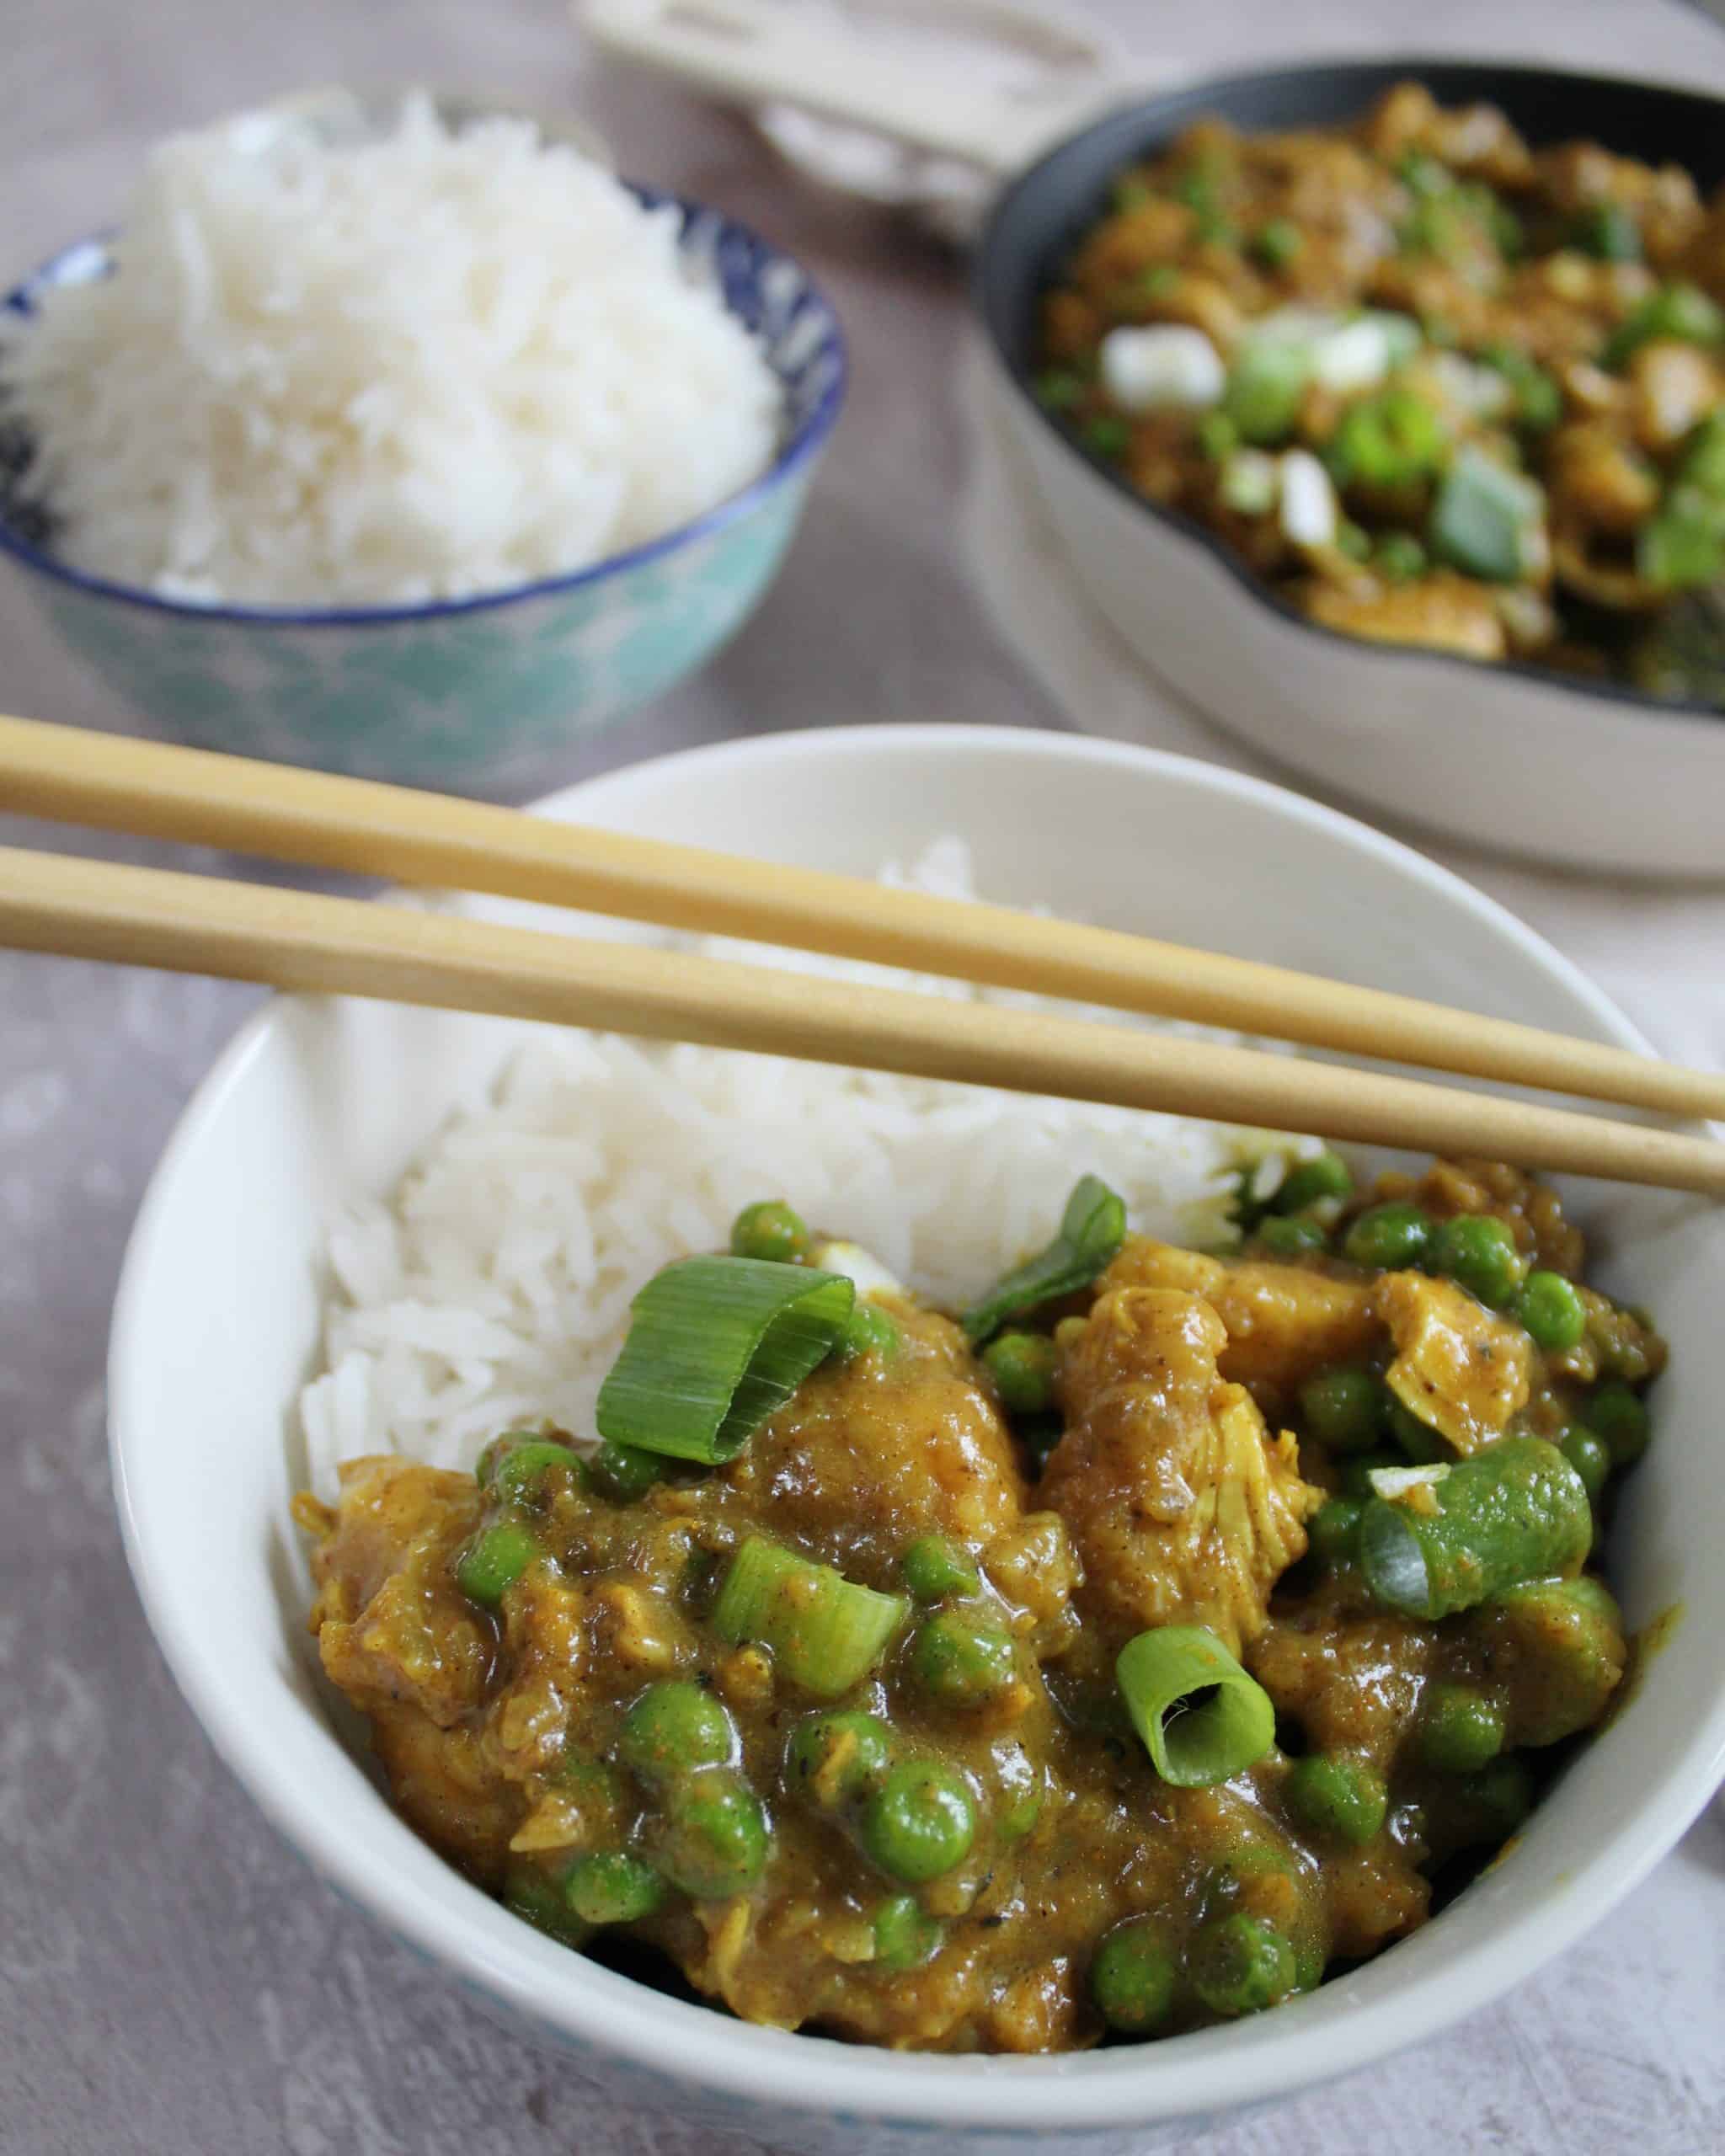 EASY Gluten Free Chinese Curry Recipe - The Gluten Free Blogger